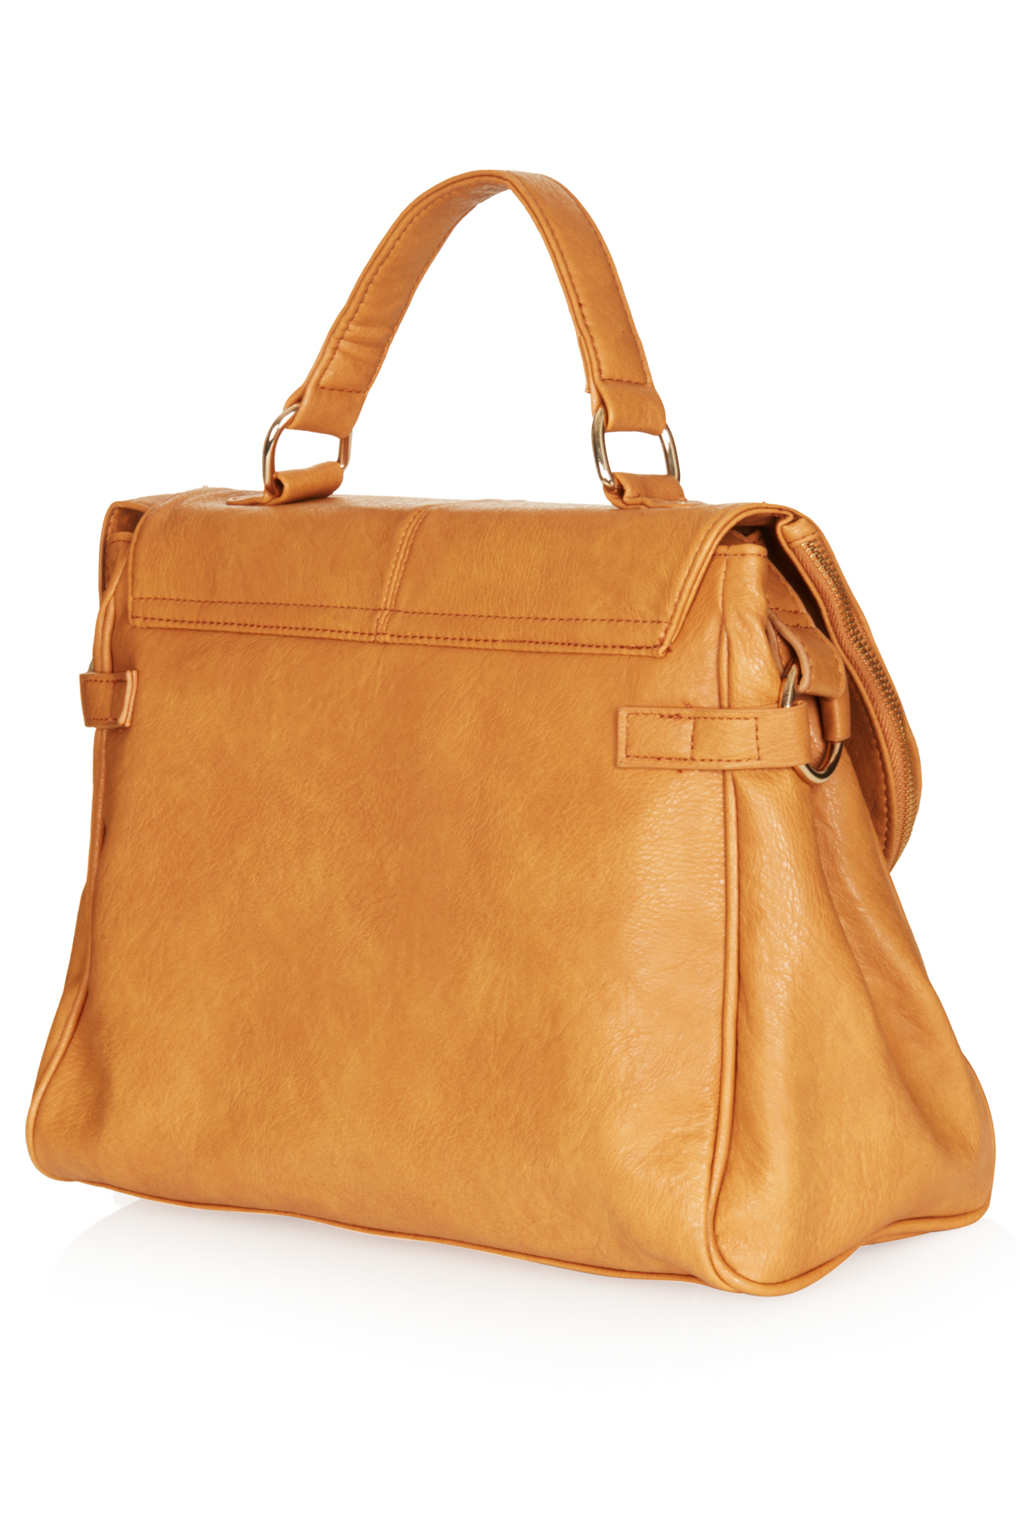 Lyst - Topshop Large Soft Zip Holdall in Brown